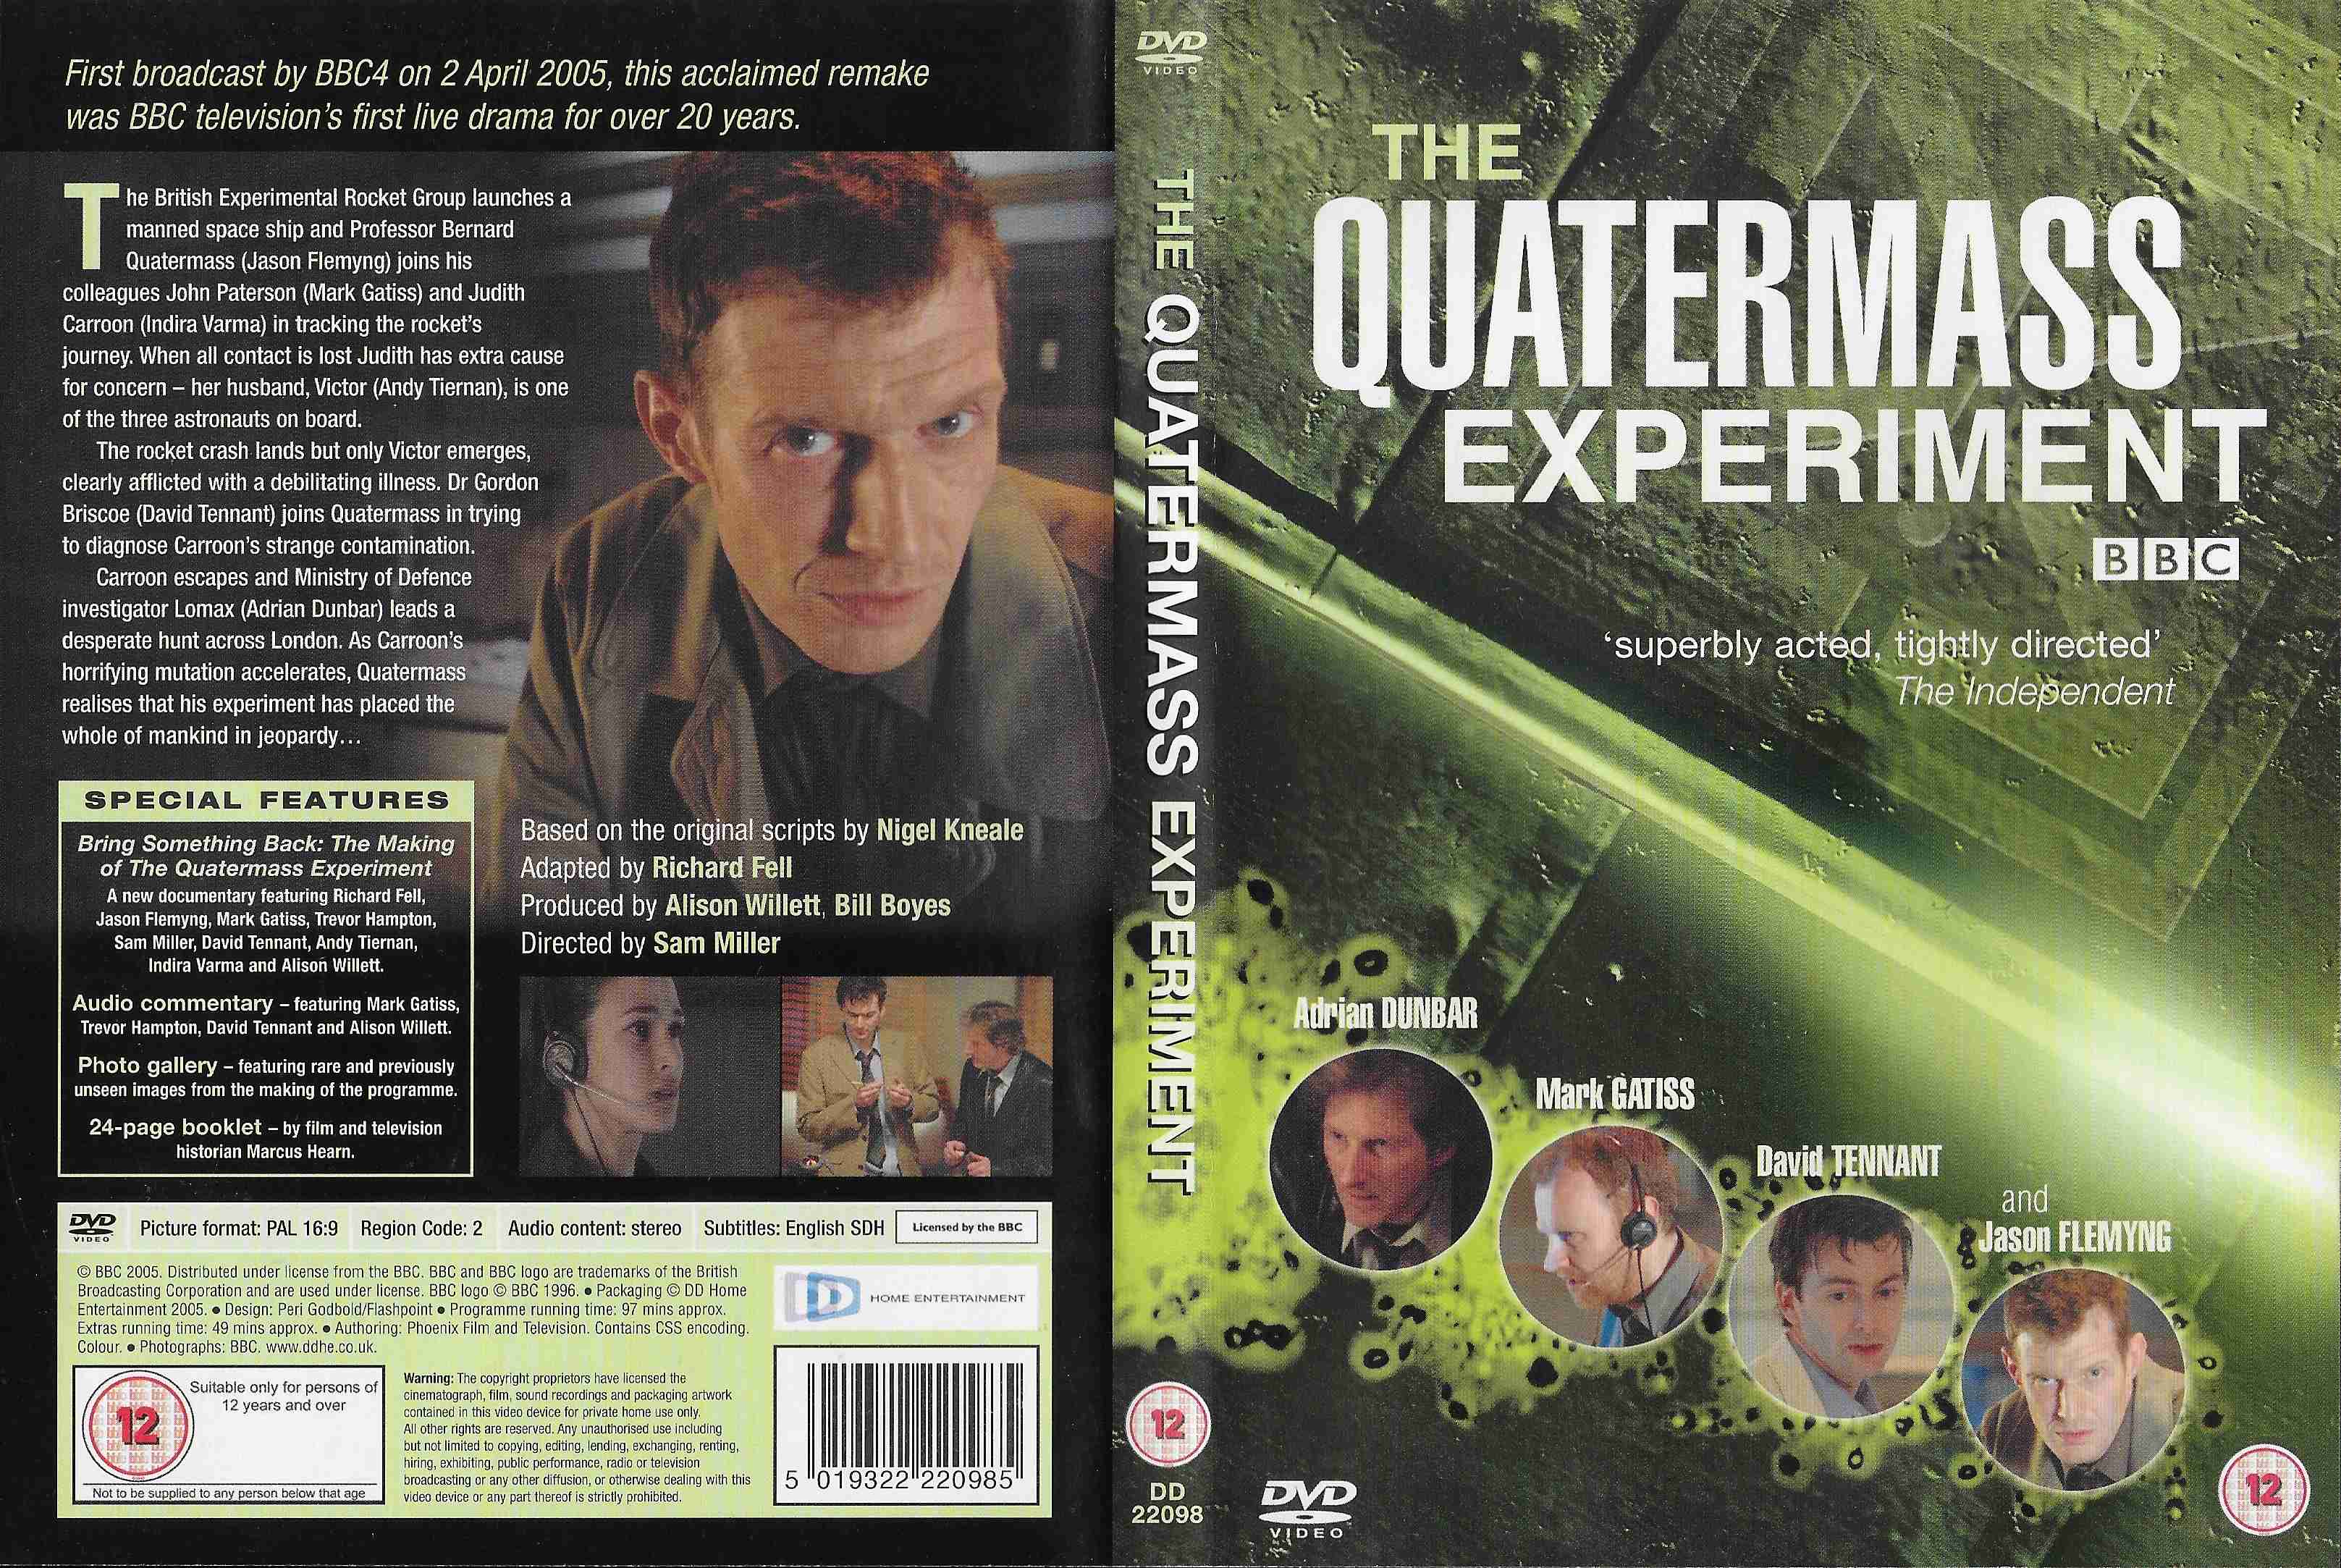 Picture of DD 22098 The Quatermass experiment by artist Nigel Kneale from the BBC records and Tapes library